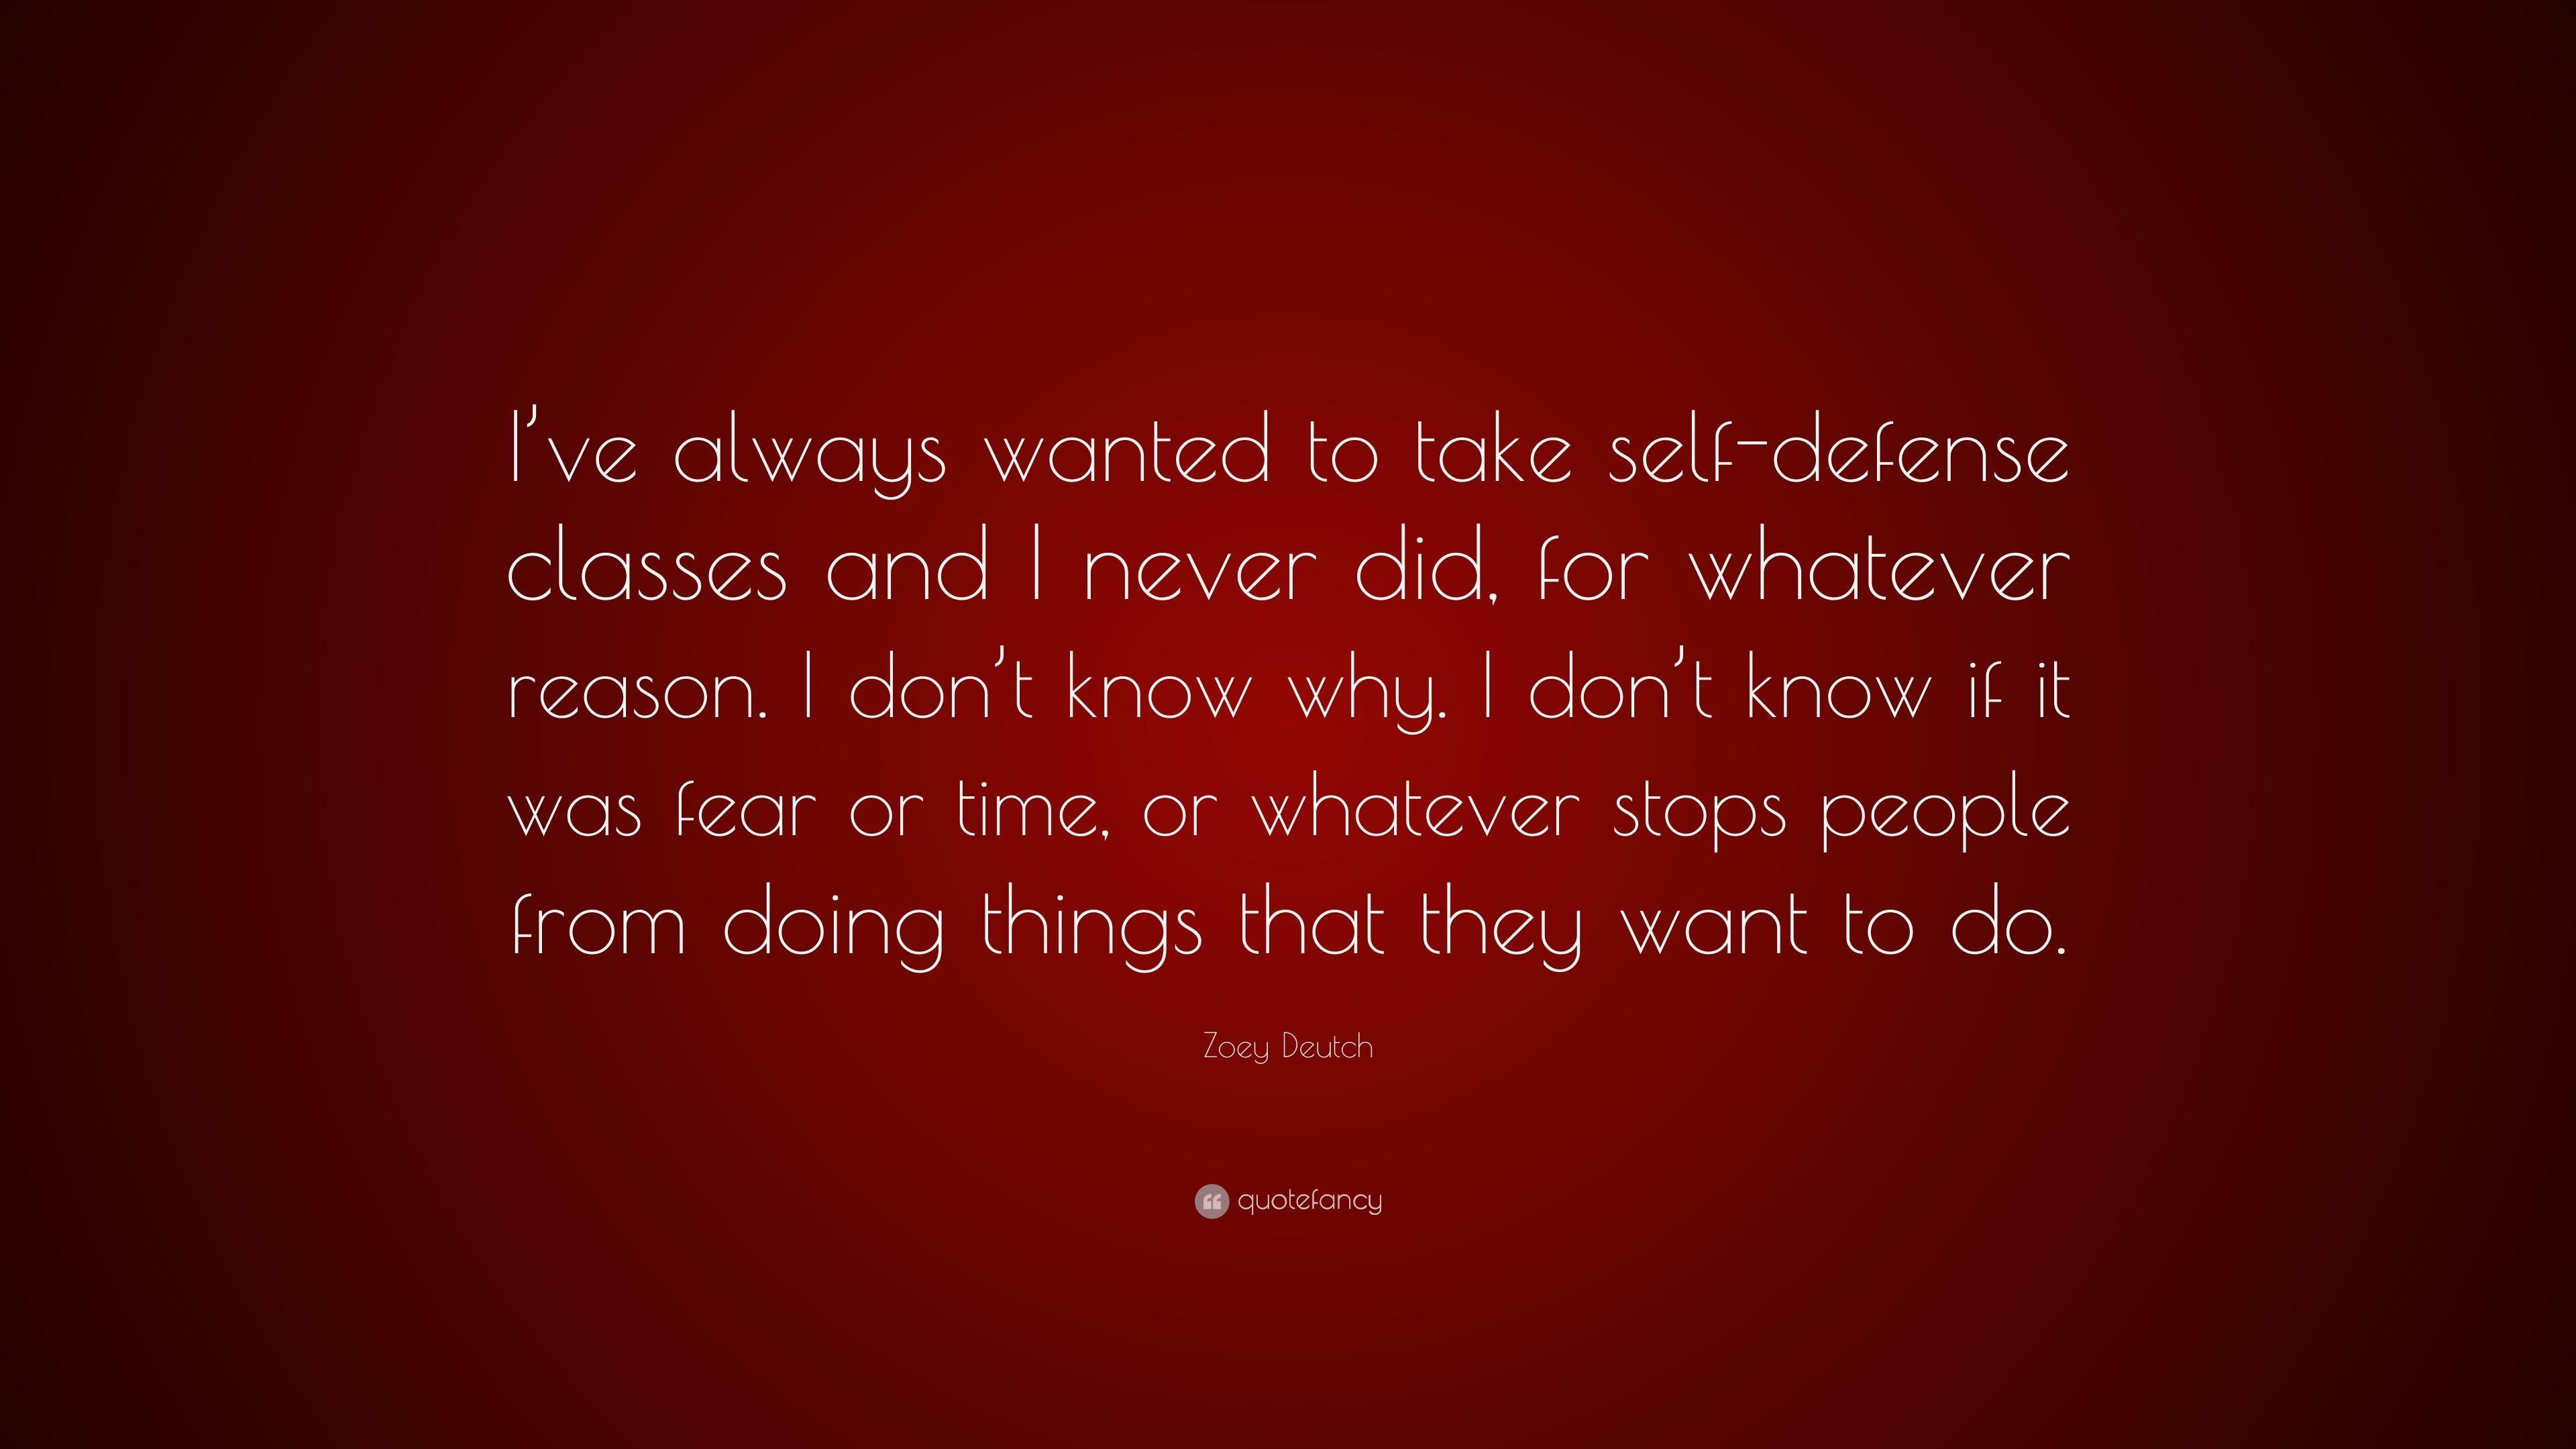 Zoey Deutch Quote I Ve Always Wanted To Take Self Defense Classes And I Never Did For Whatever Reason I Don T Know Why I Don T Know If